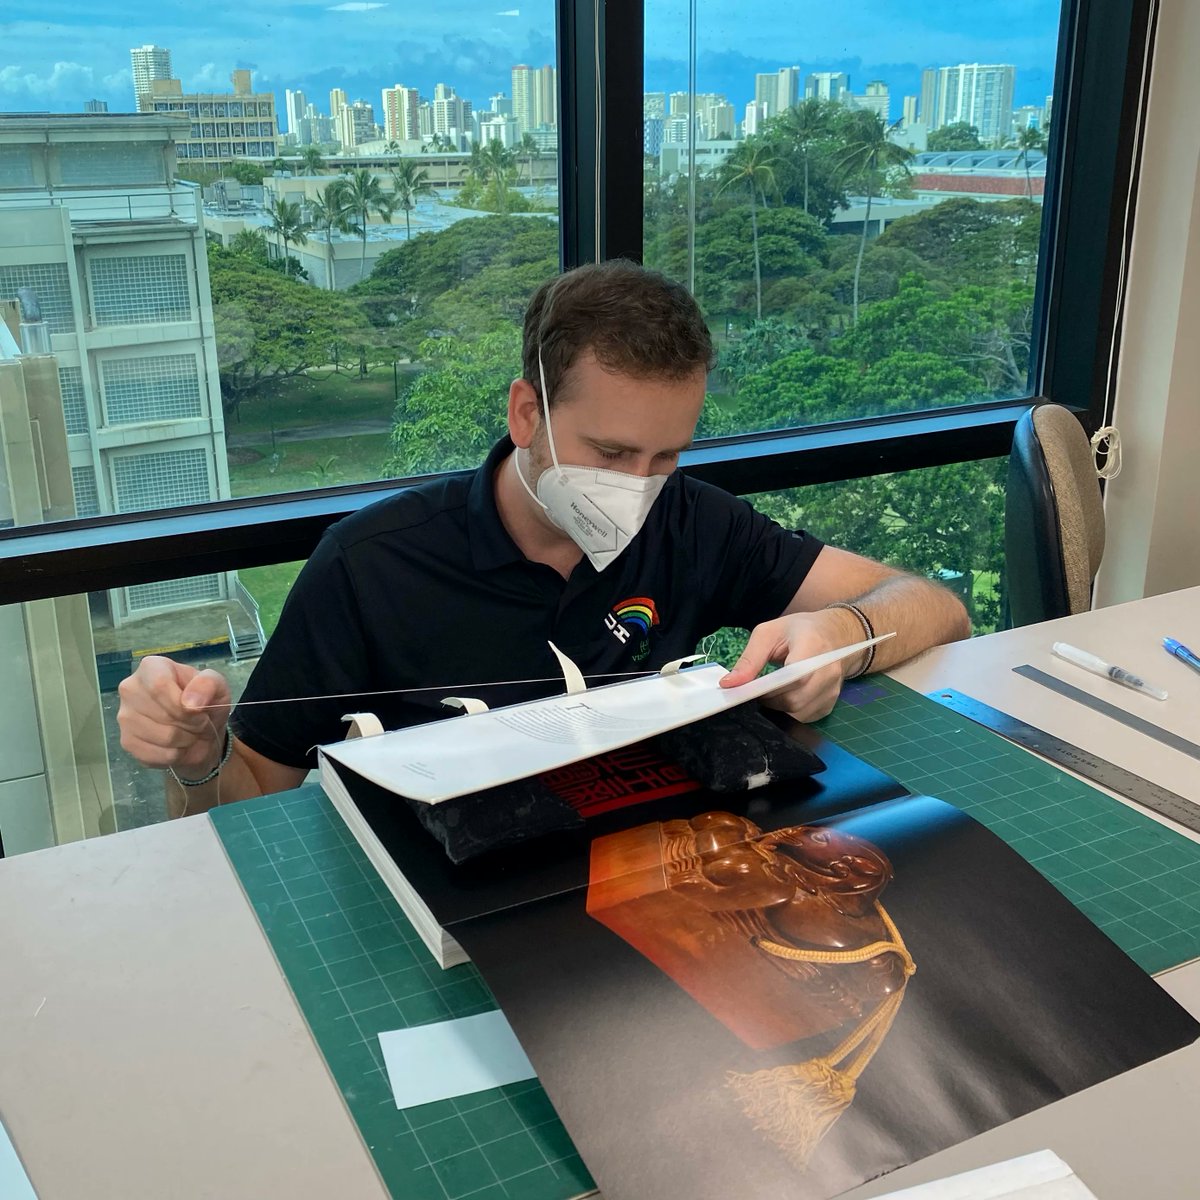 For #PreservationWeek, let's check-in with our Preservation Dept! Our staff stabilizes our collections so they can be used by our patrons. Here, our circulating collections conservator repairs this volume by stabilizing the broken text-block and reattaching the front cover.